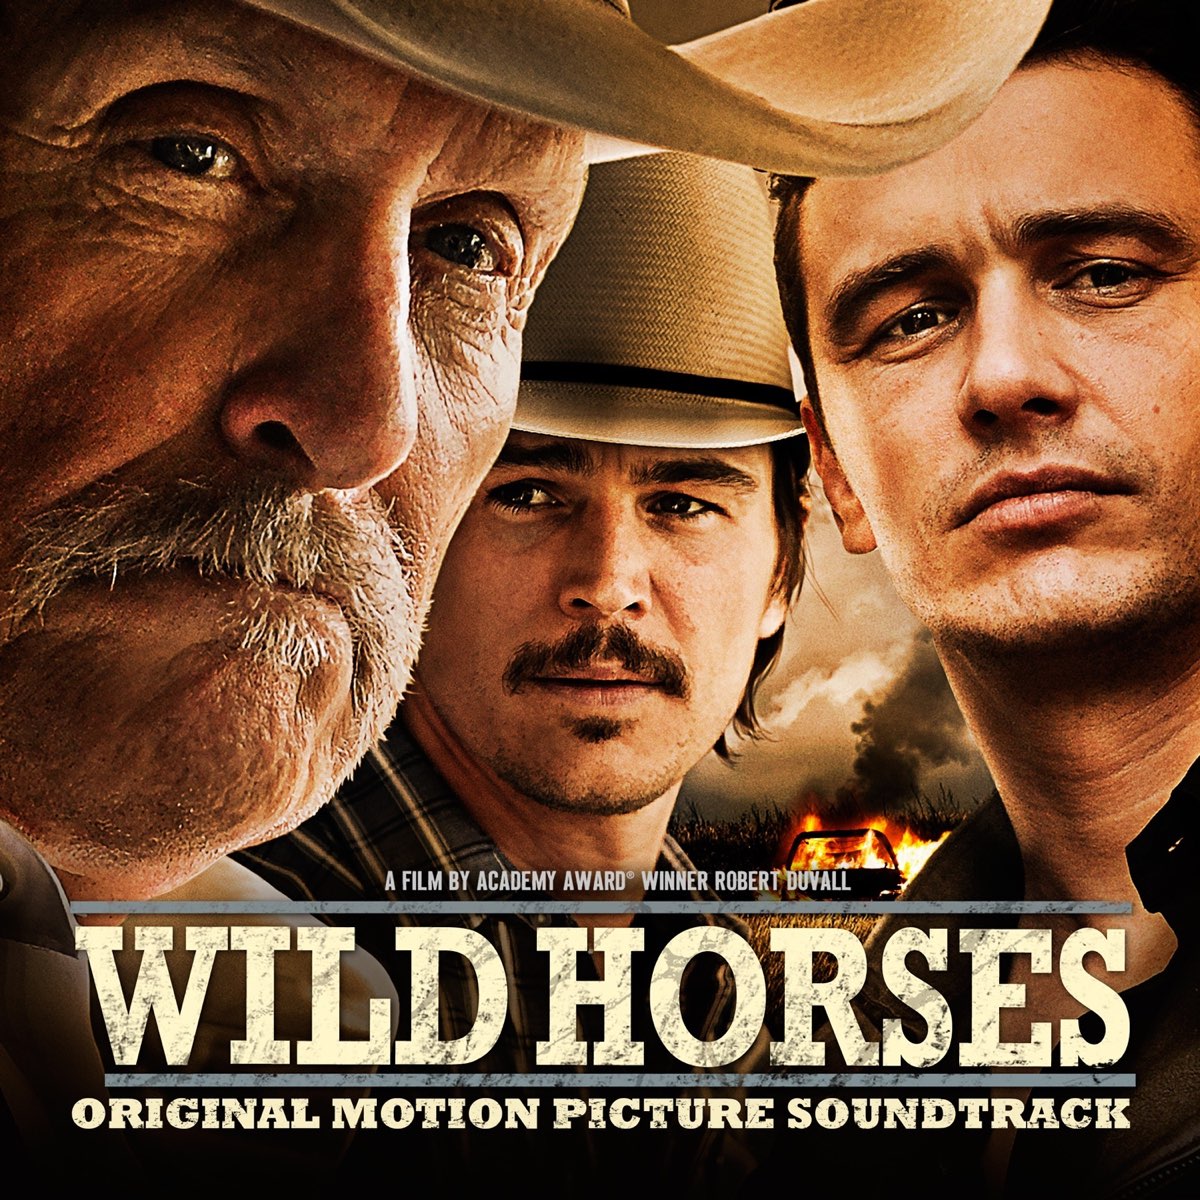 ‎Wild Horses (Original Motion Picture Soundtrack) by Various Artists on